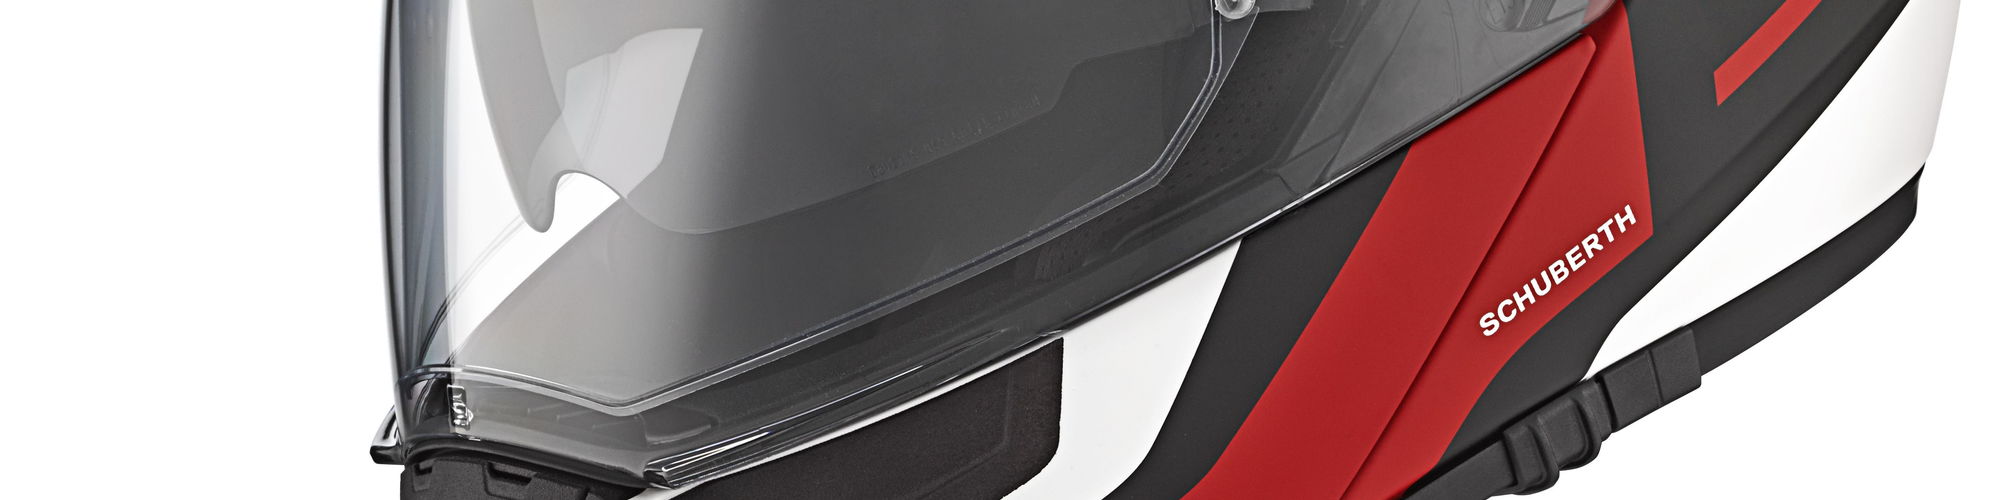 Schuberth cover image